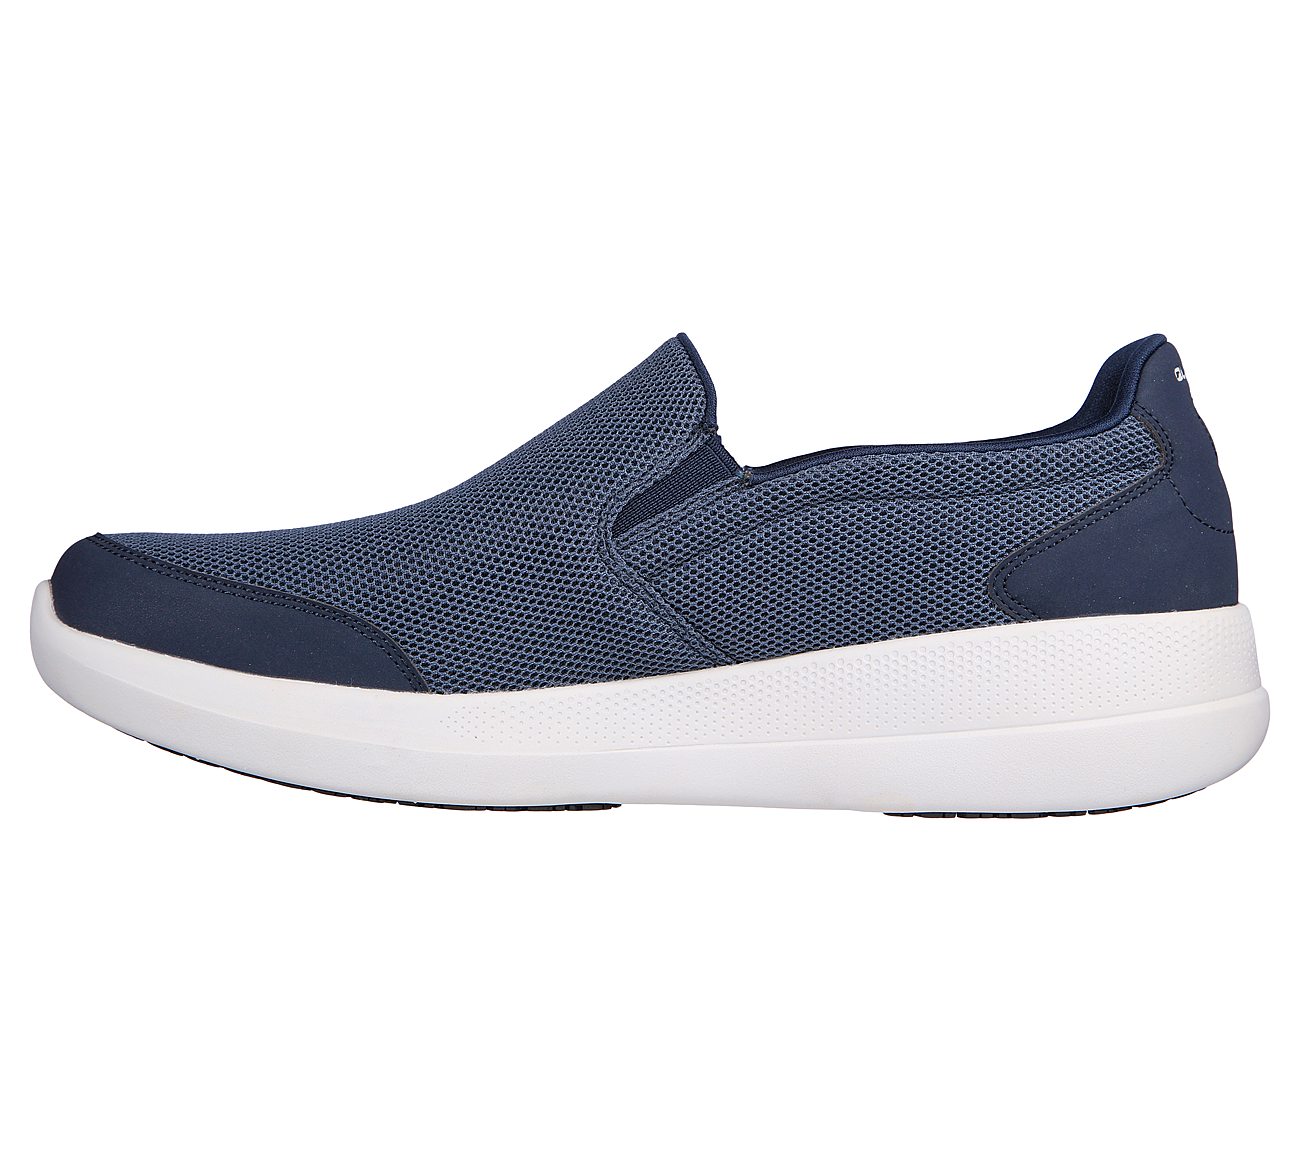 Skechers Navy Go Walk Stability Resolute Mens Slip On Shoes - Style ID ...